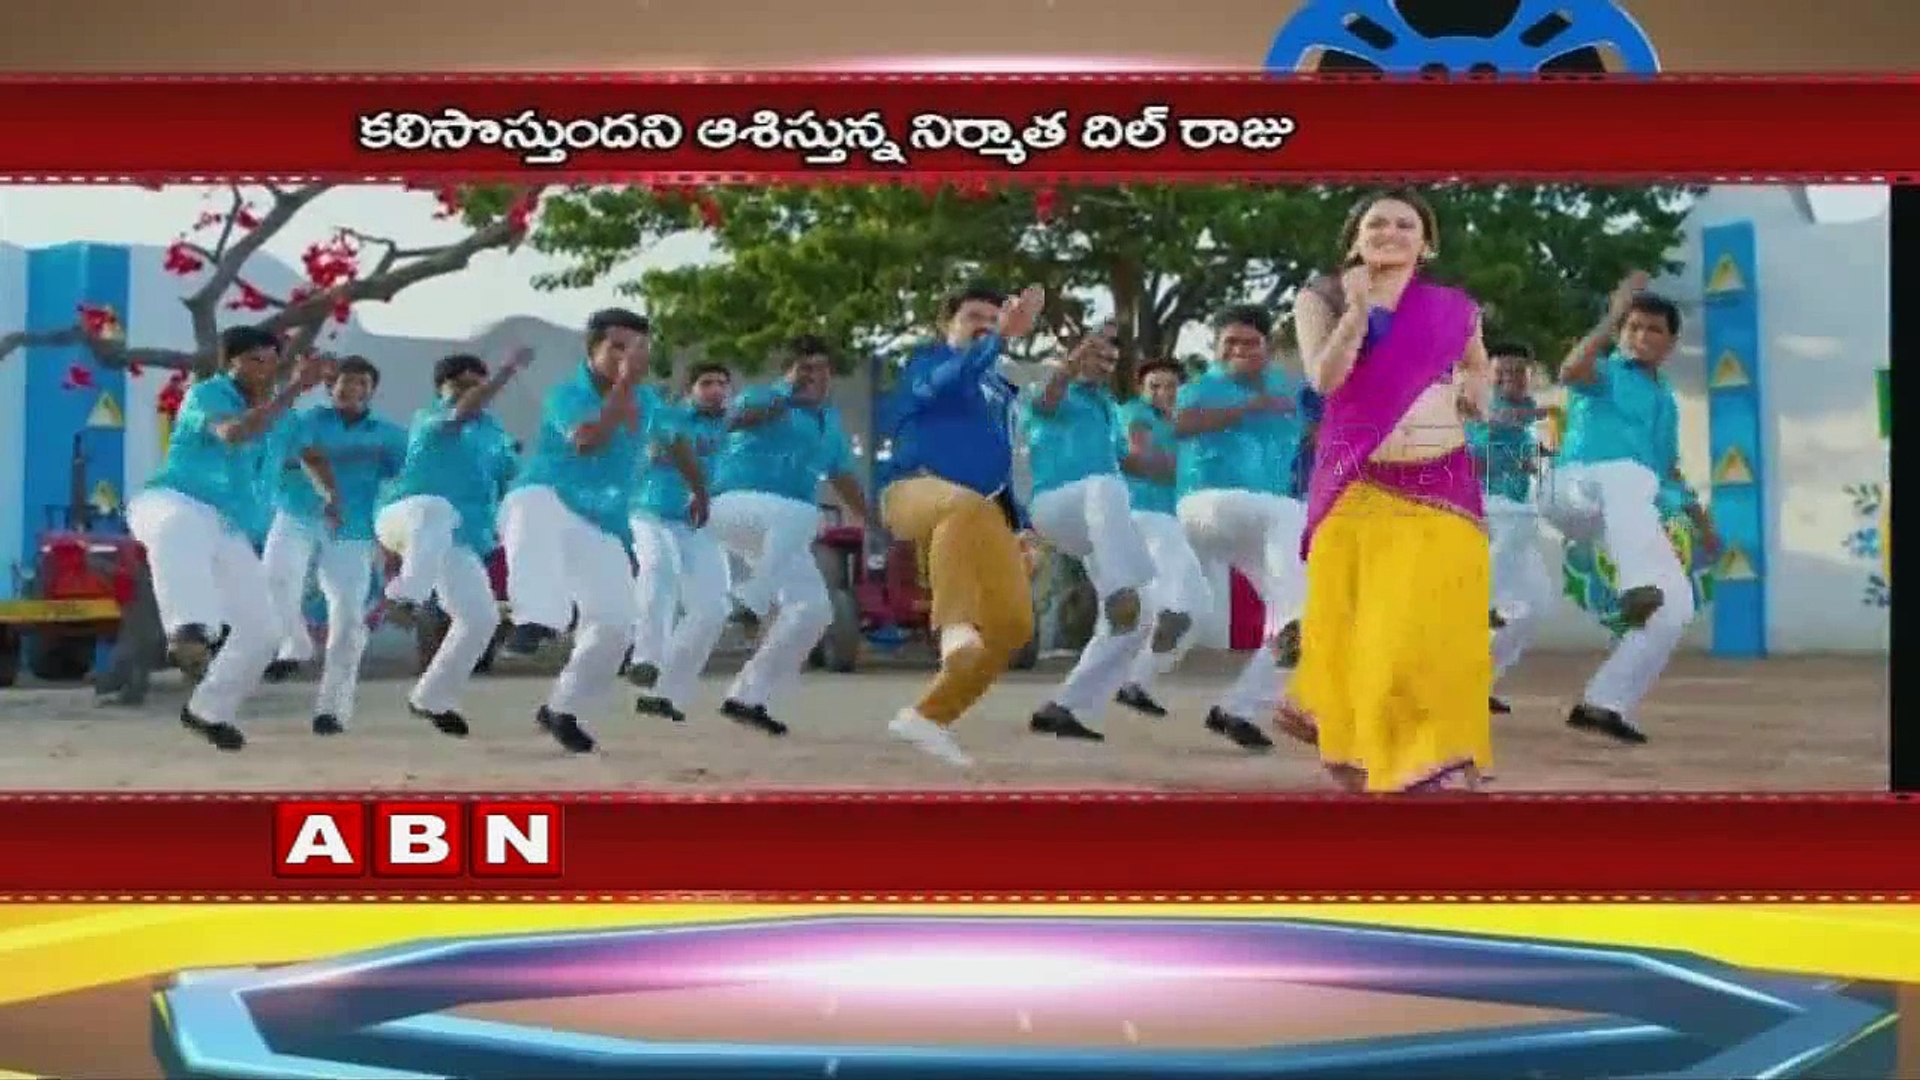 Dil Raju Owned the 'Dictator' Movie Nizam Rights